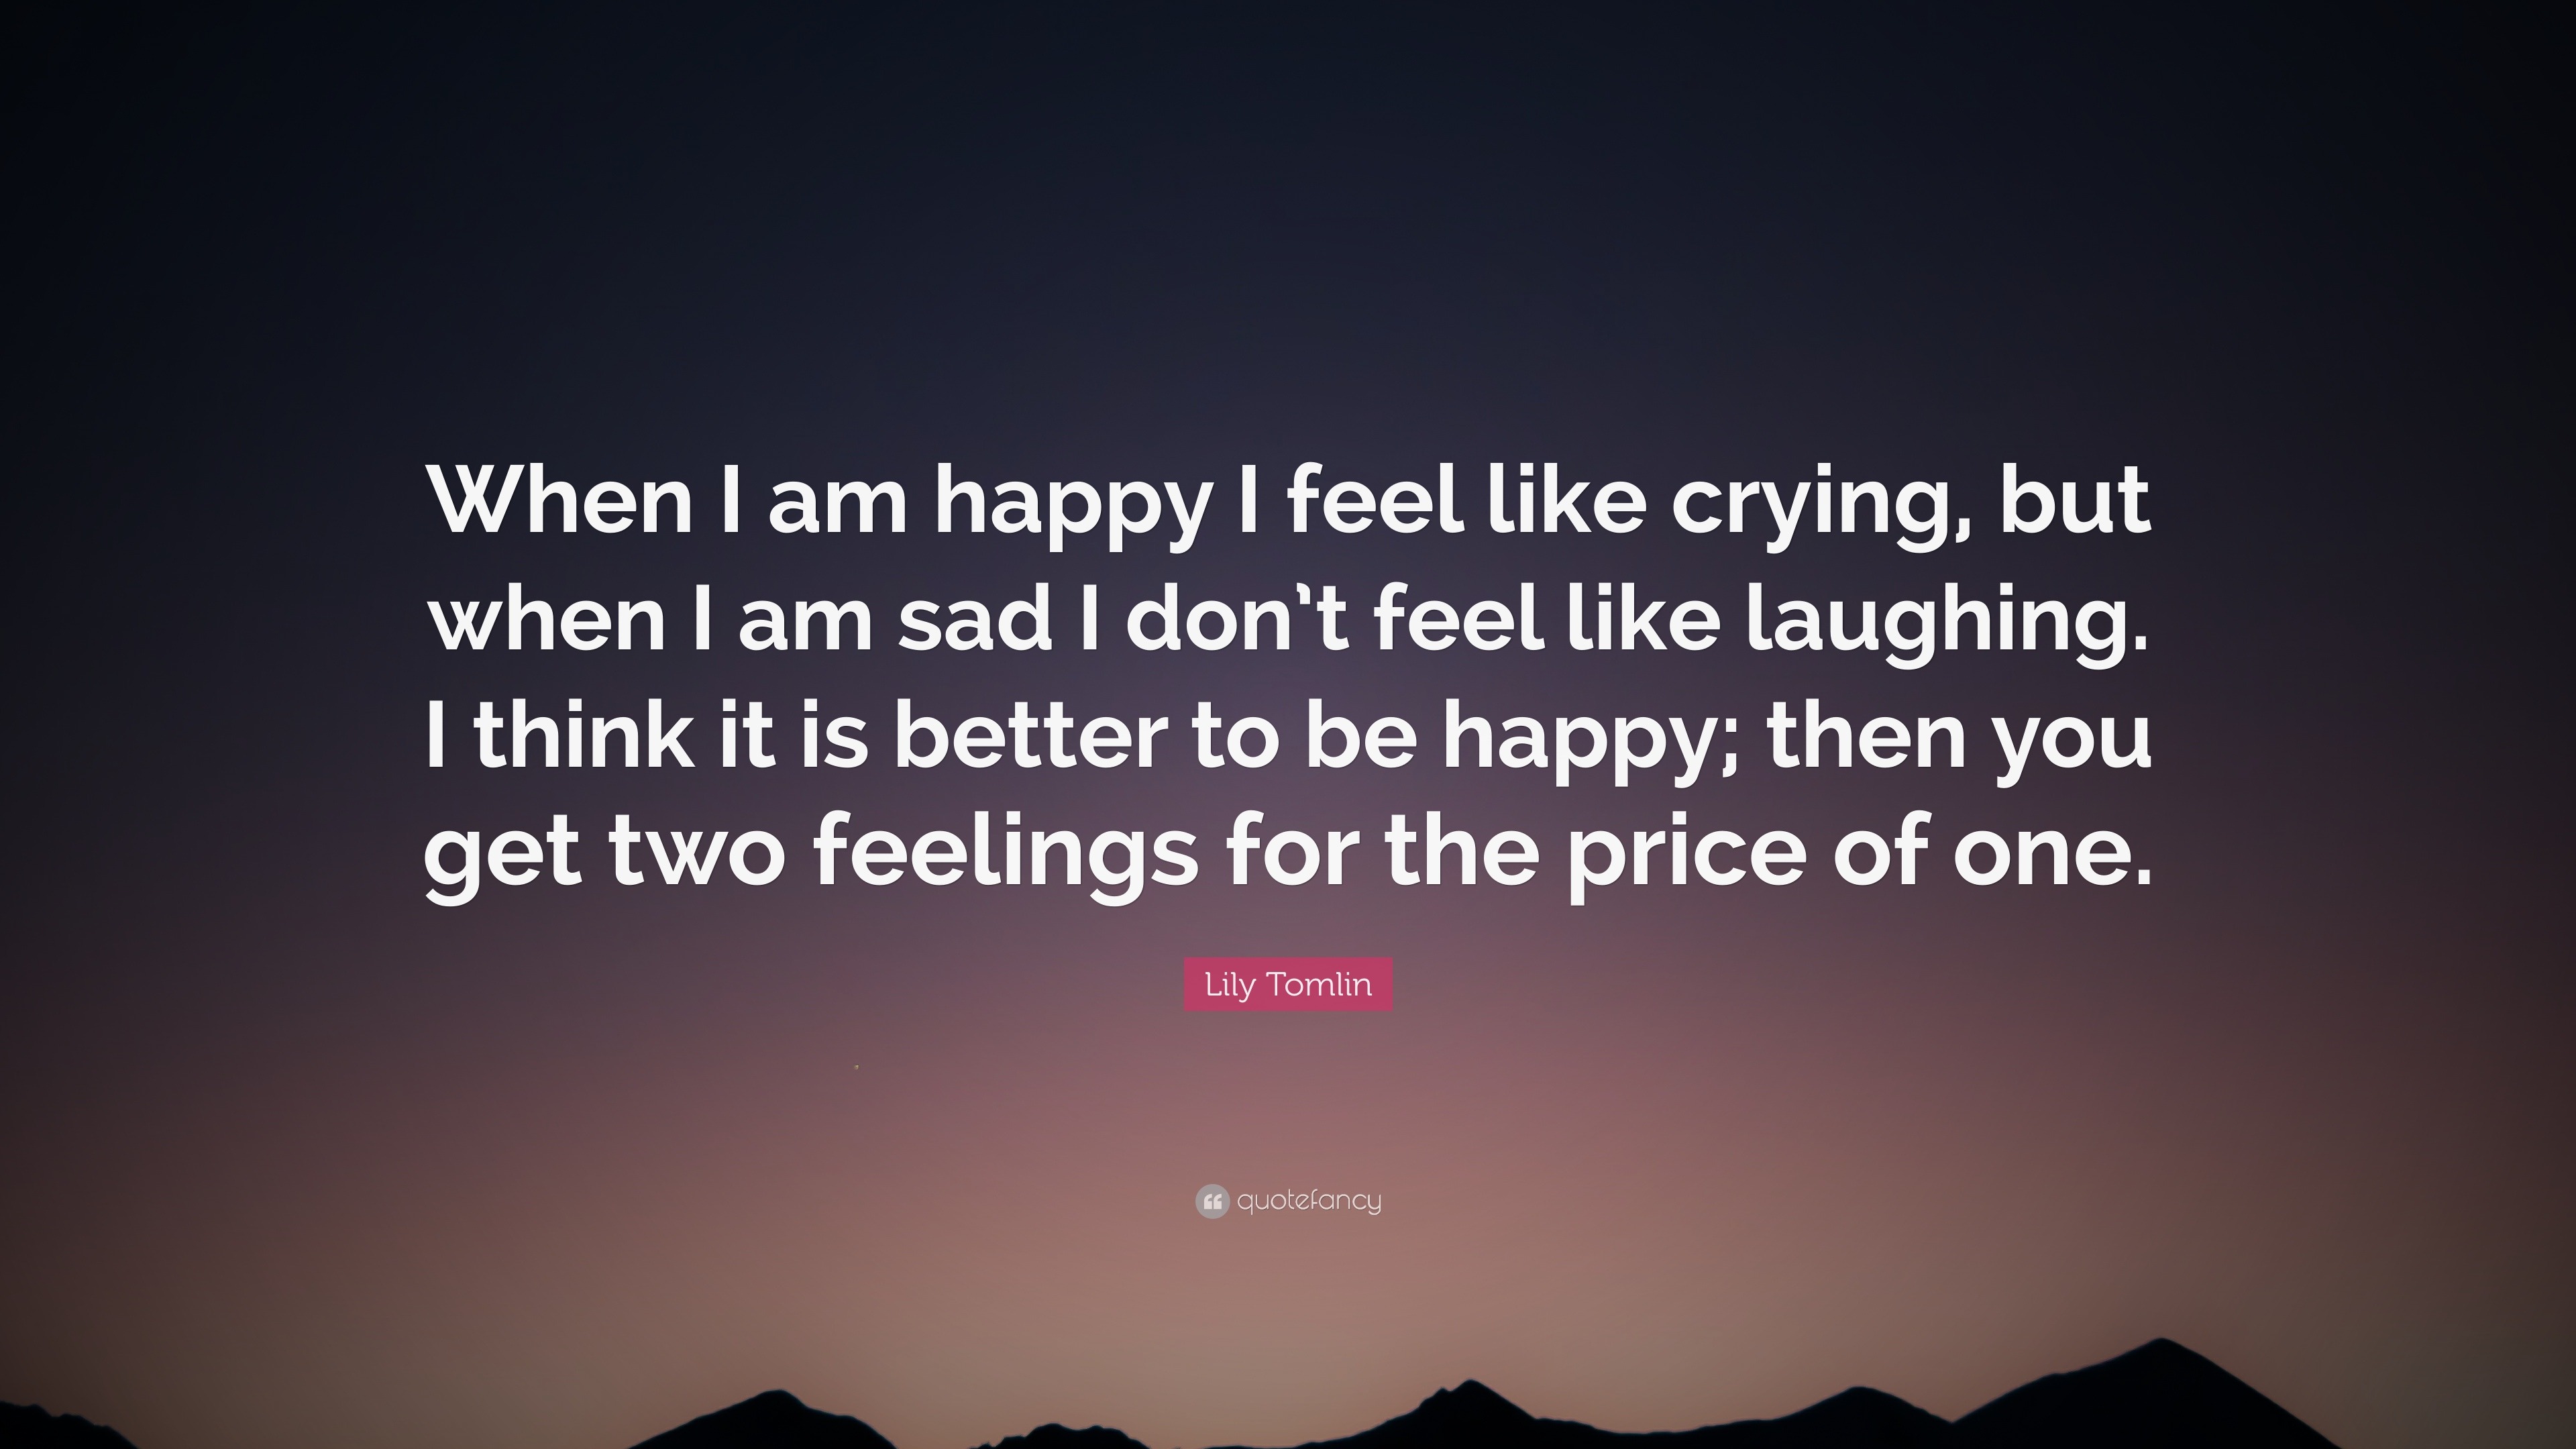 Lily Tomlin Quote When I Am Happy I Feel Like Crying But When I Am Sad I Don T Feel Like Laughing I Think It Is Better To Be Happy Then